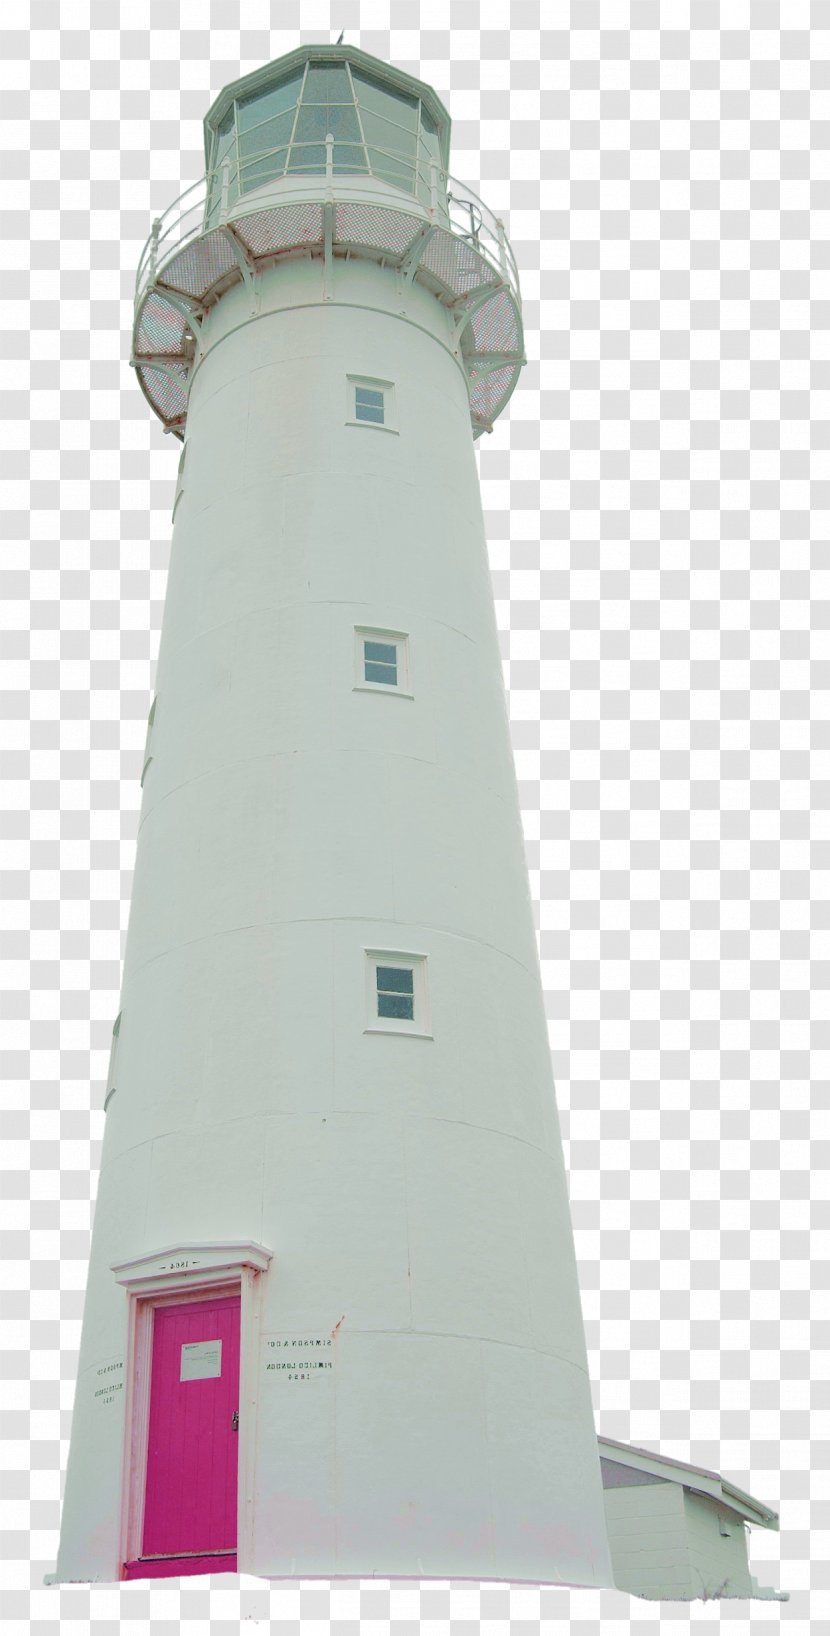 Light - Transparency And Translucency - Lighthouse Transparent PNG